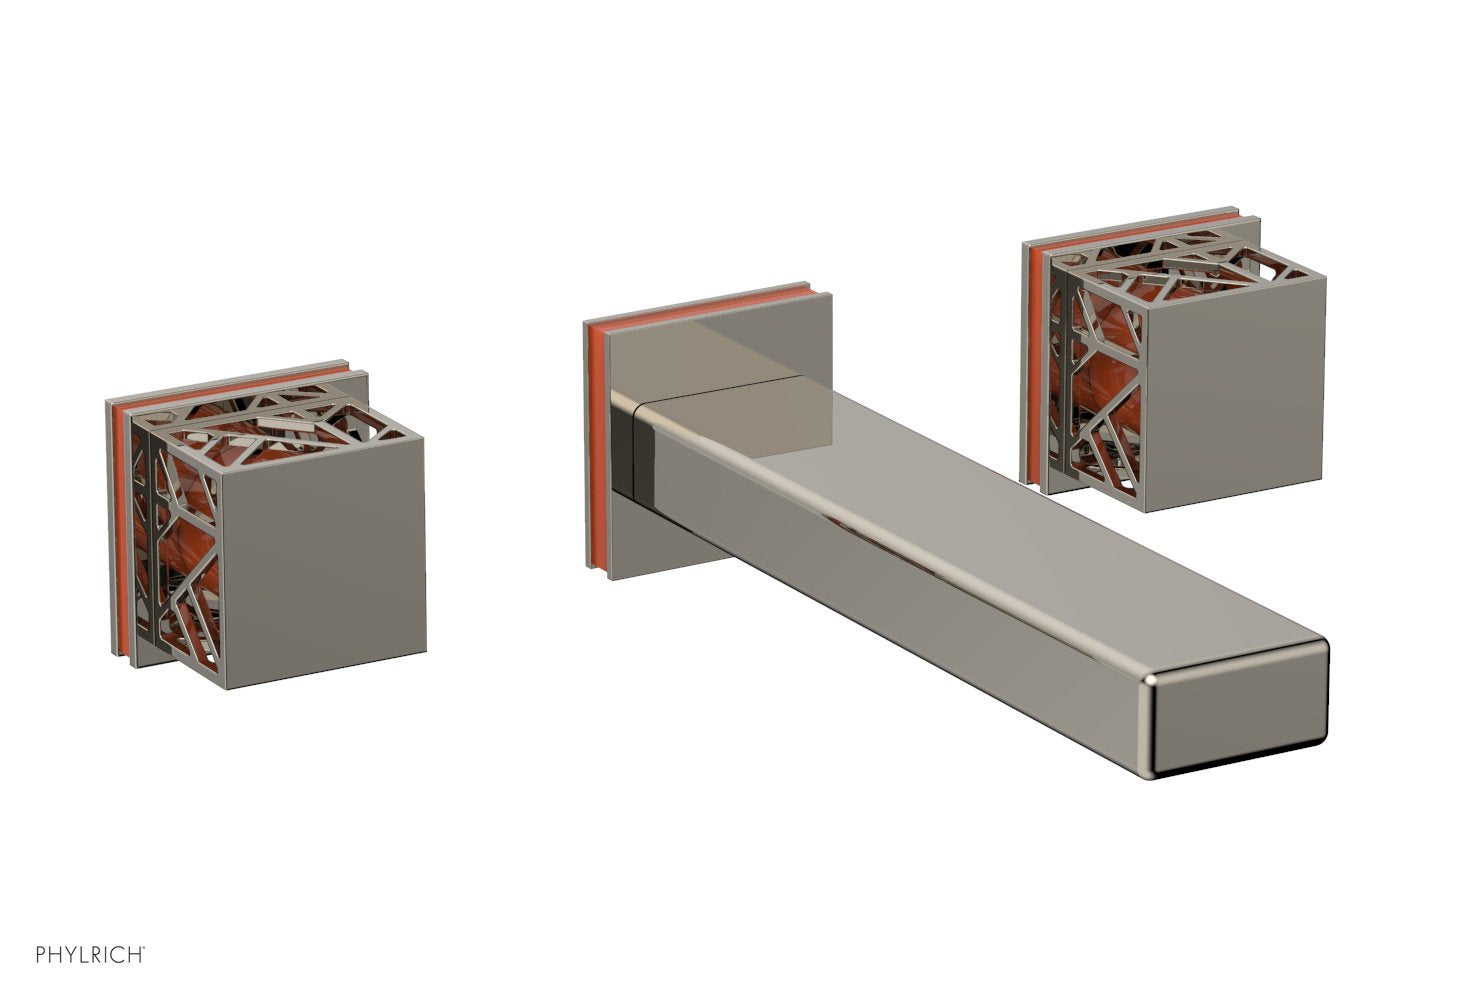 Phylrich JOLIE Wall Lavatory Set - Square Handles with "Orange" Accents